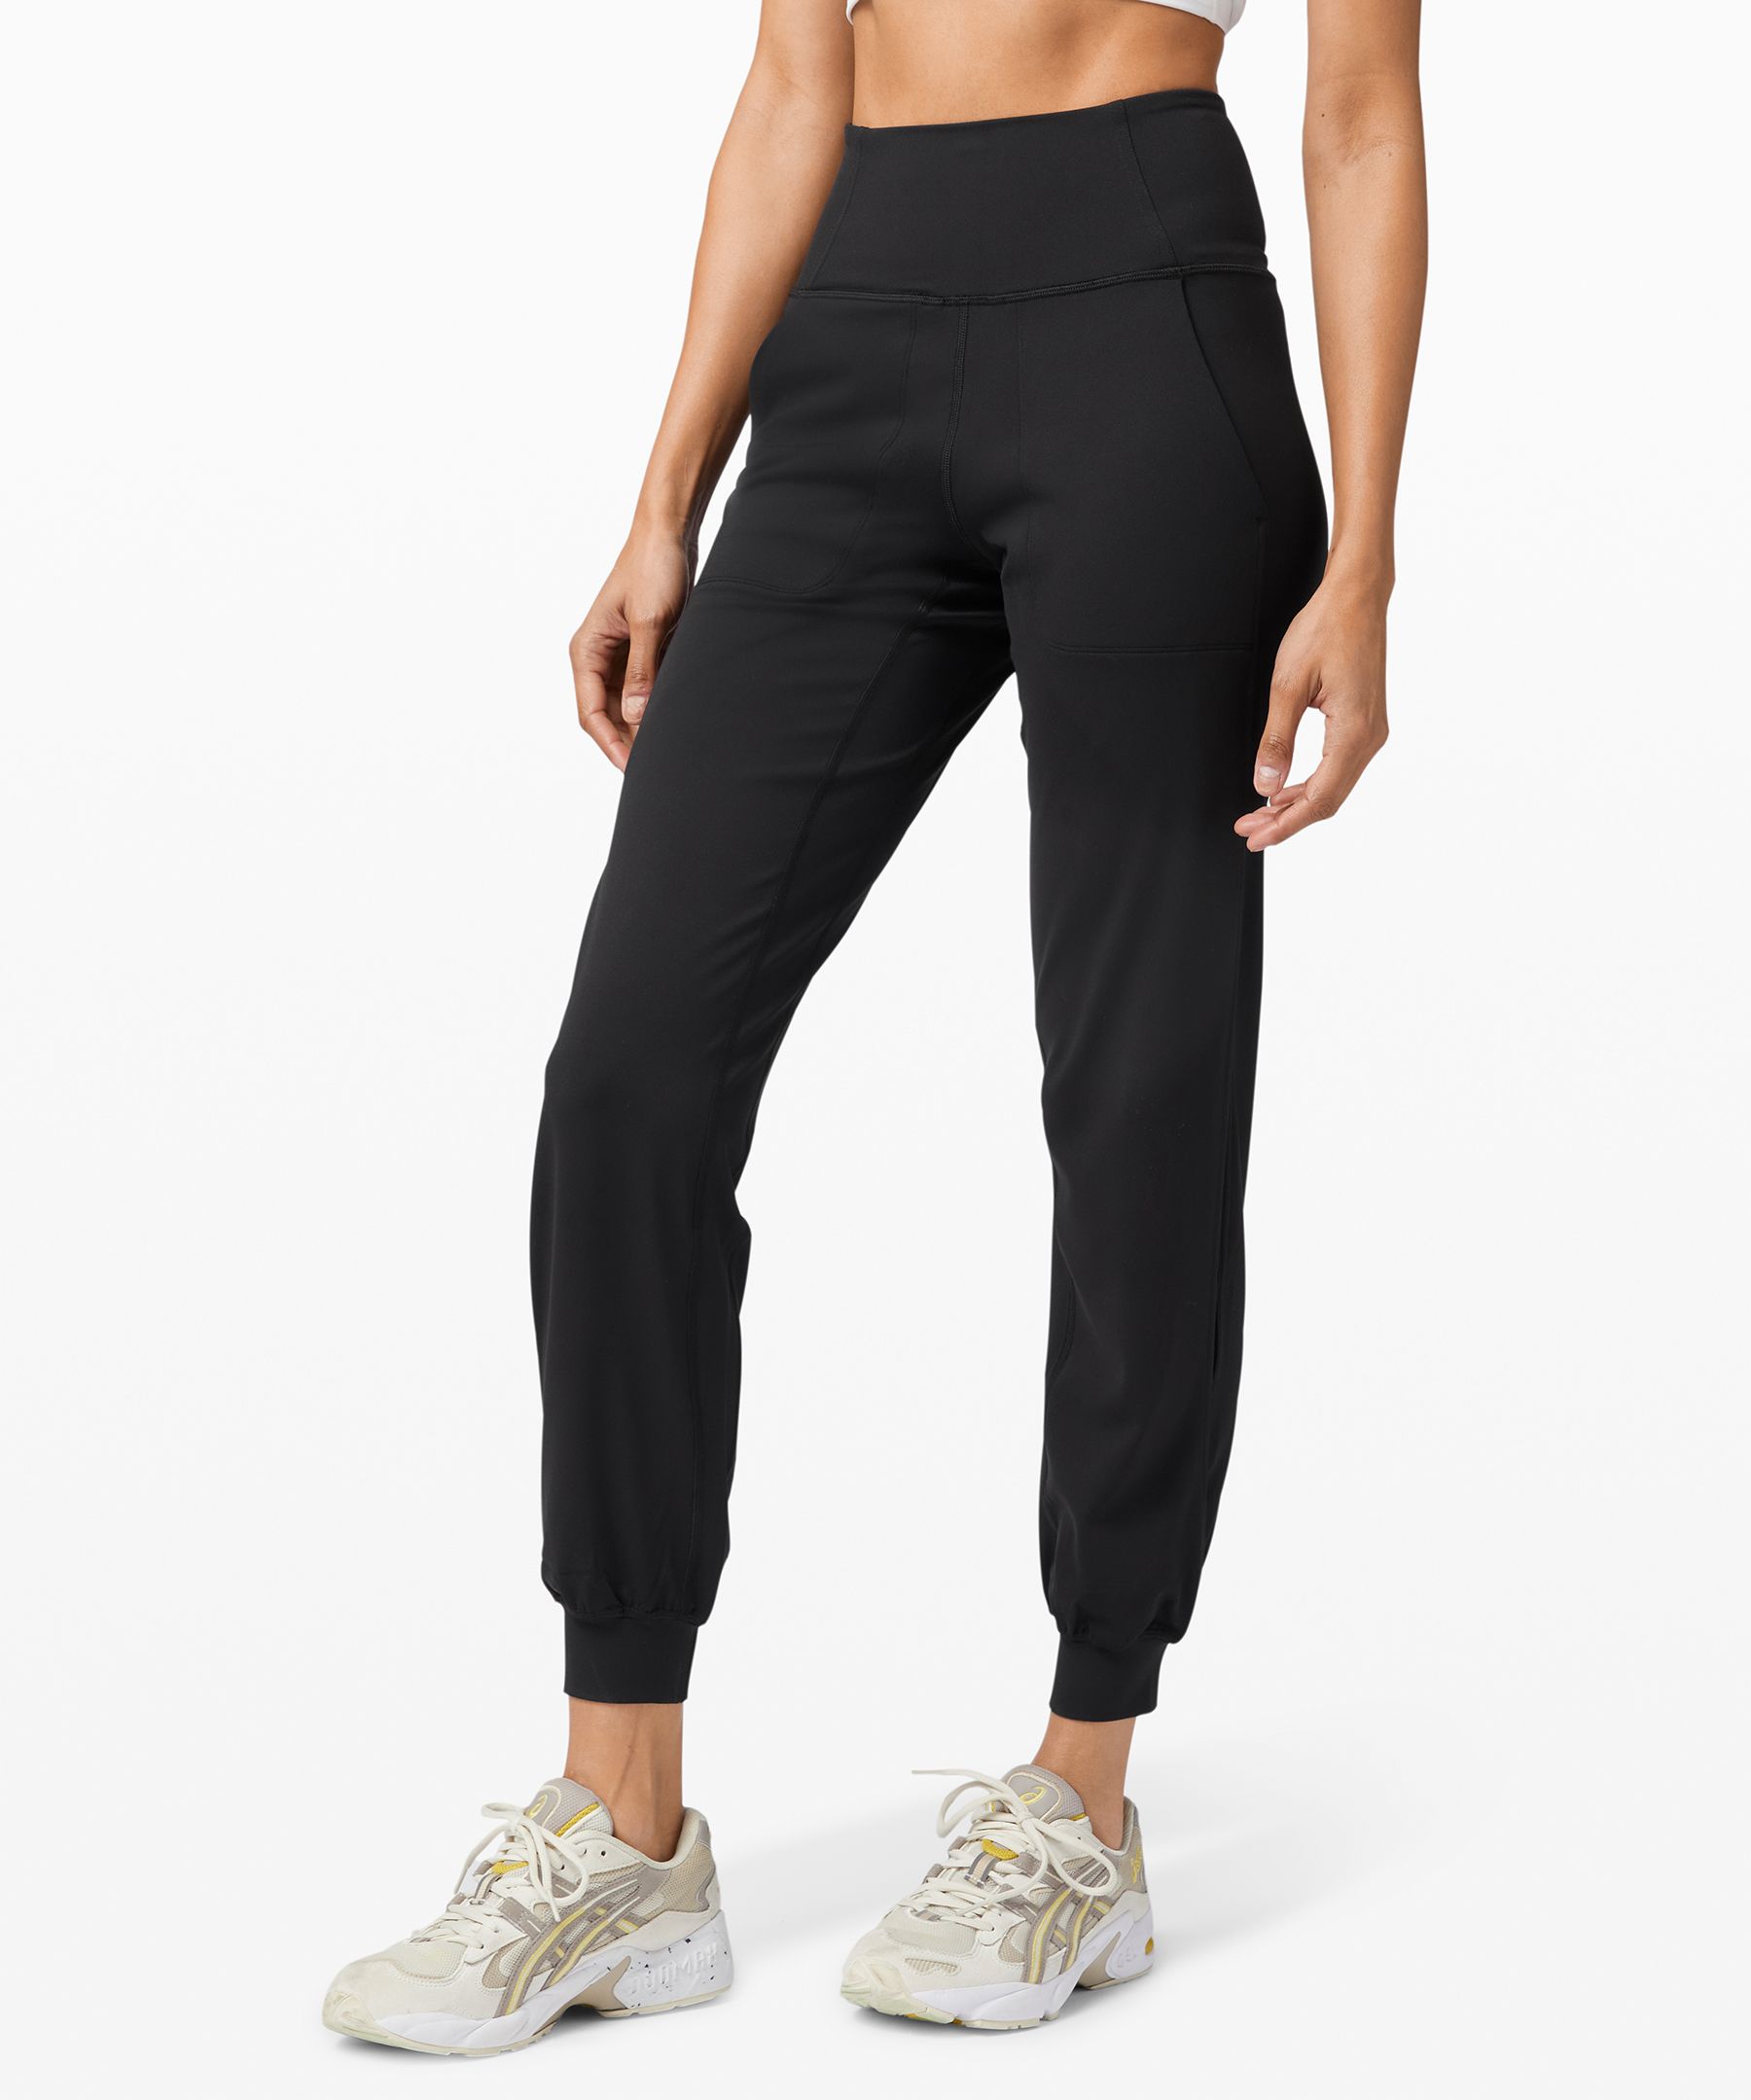 Lululemon Align joggers review: Should you buy them? - Reviewed